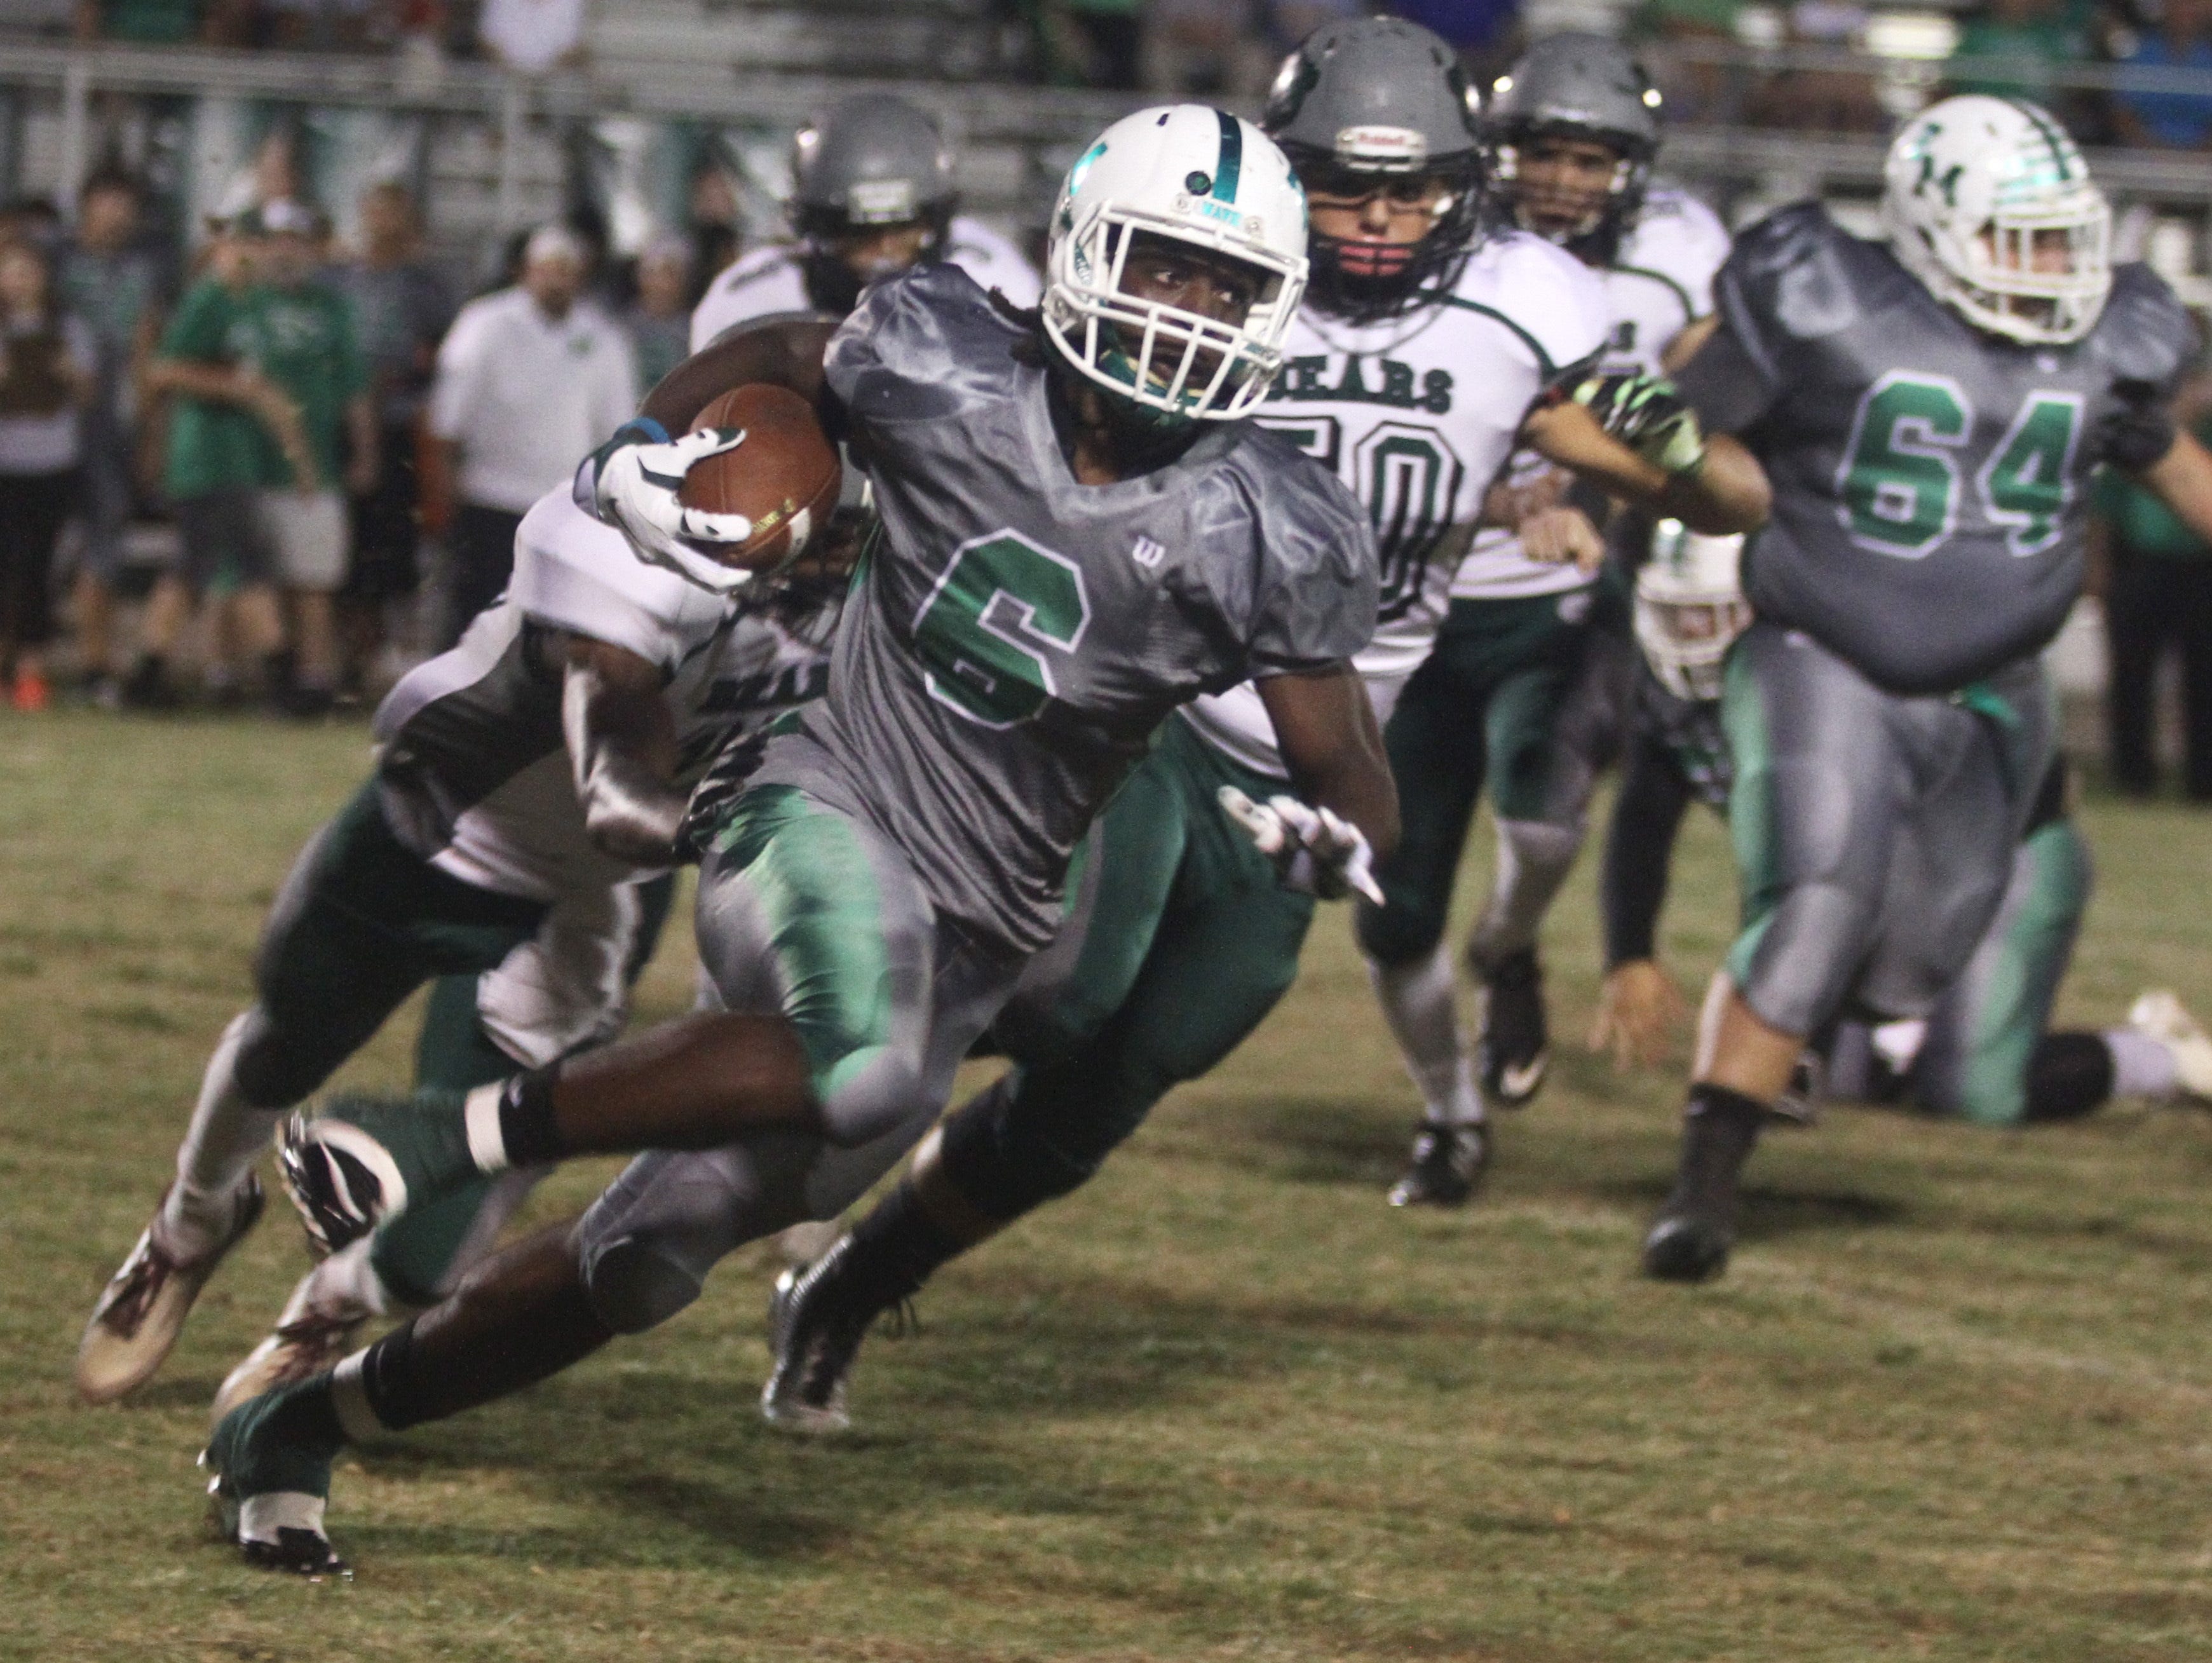 Darrian Felix of Fort Myers runs for a touchdown against Palmetto Ridge on Friday night at Fort Myers High School in November.